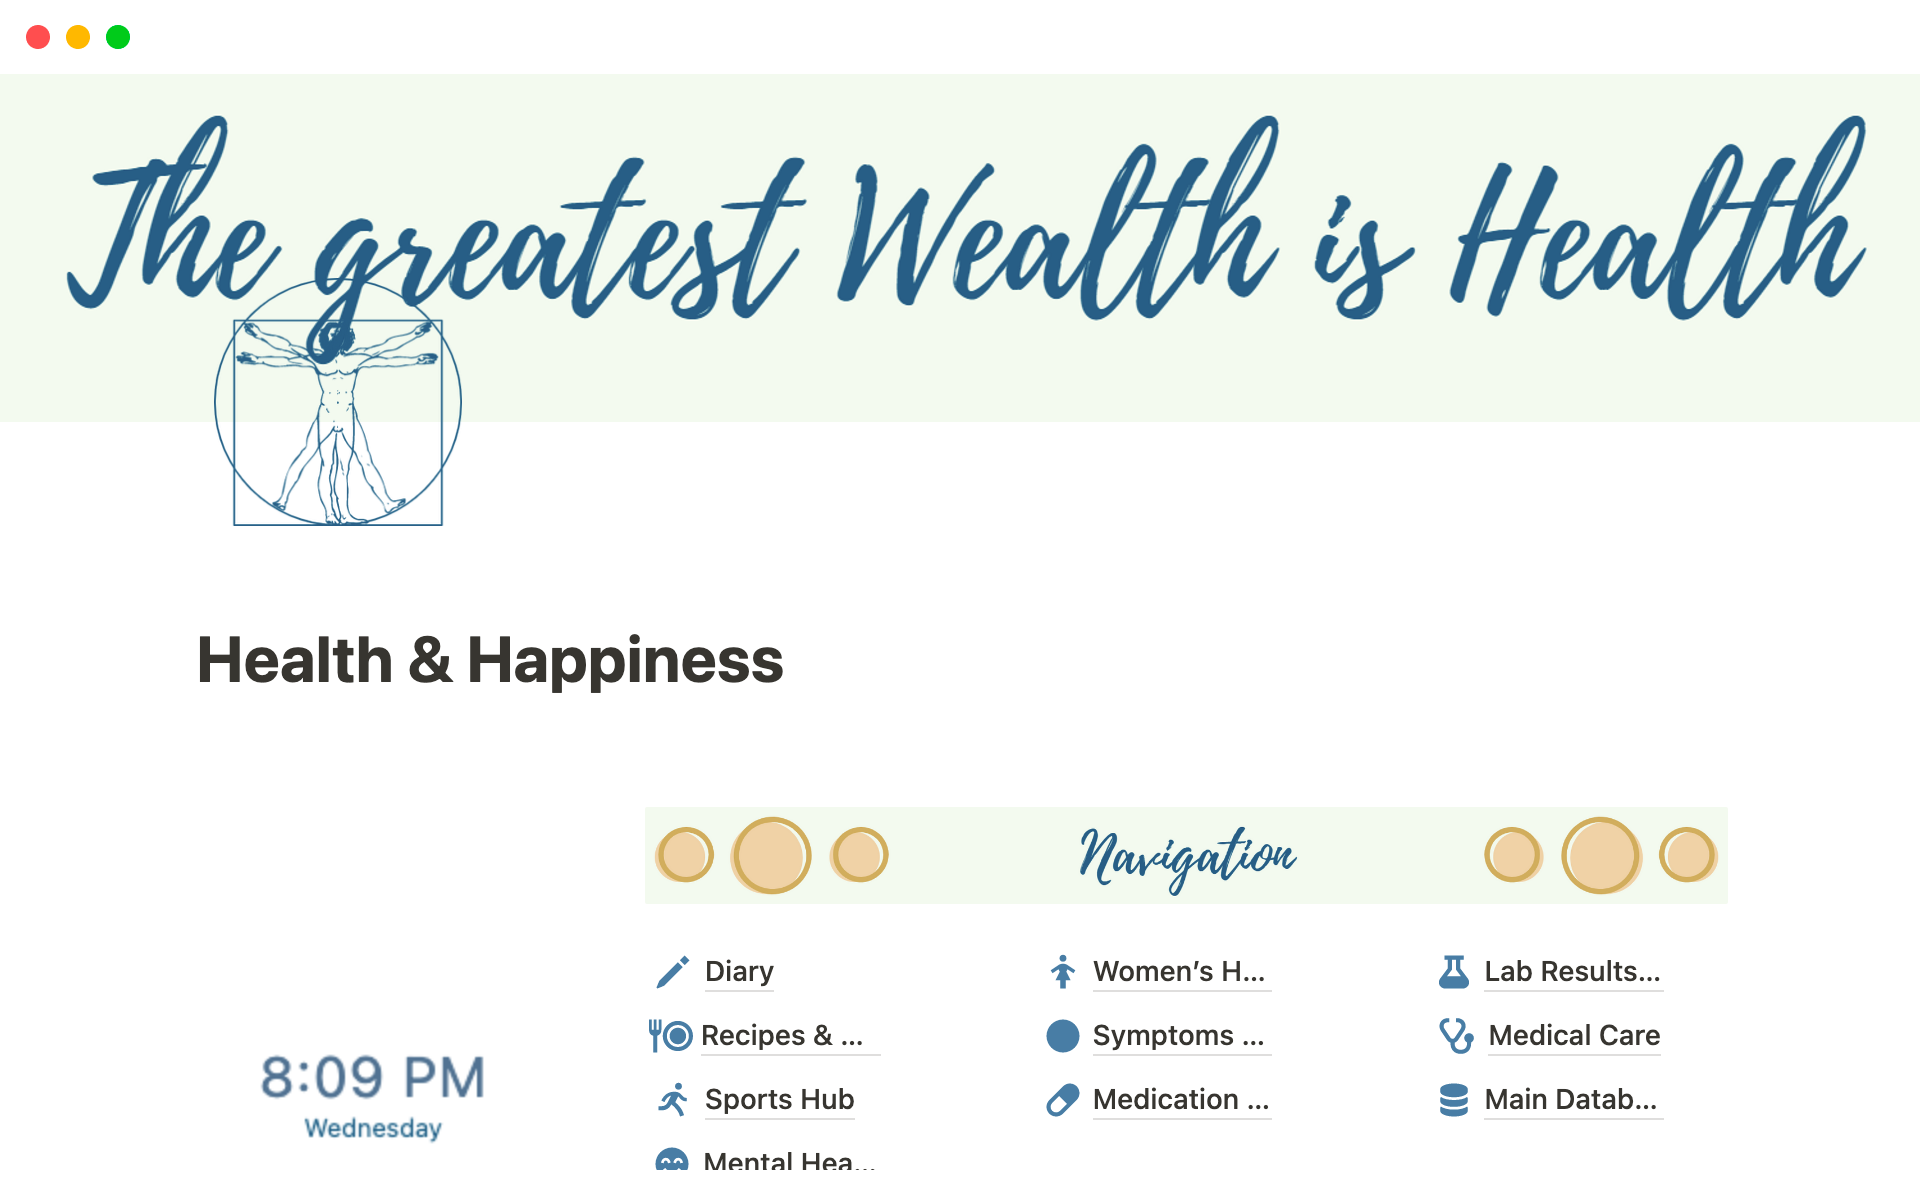 The "Health & Happiness" Notion template is the ultimate tool for tracking and improving your health and well-being.